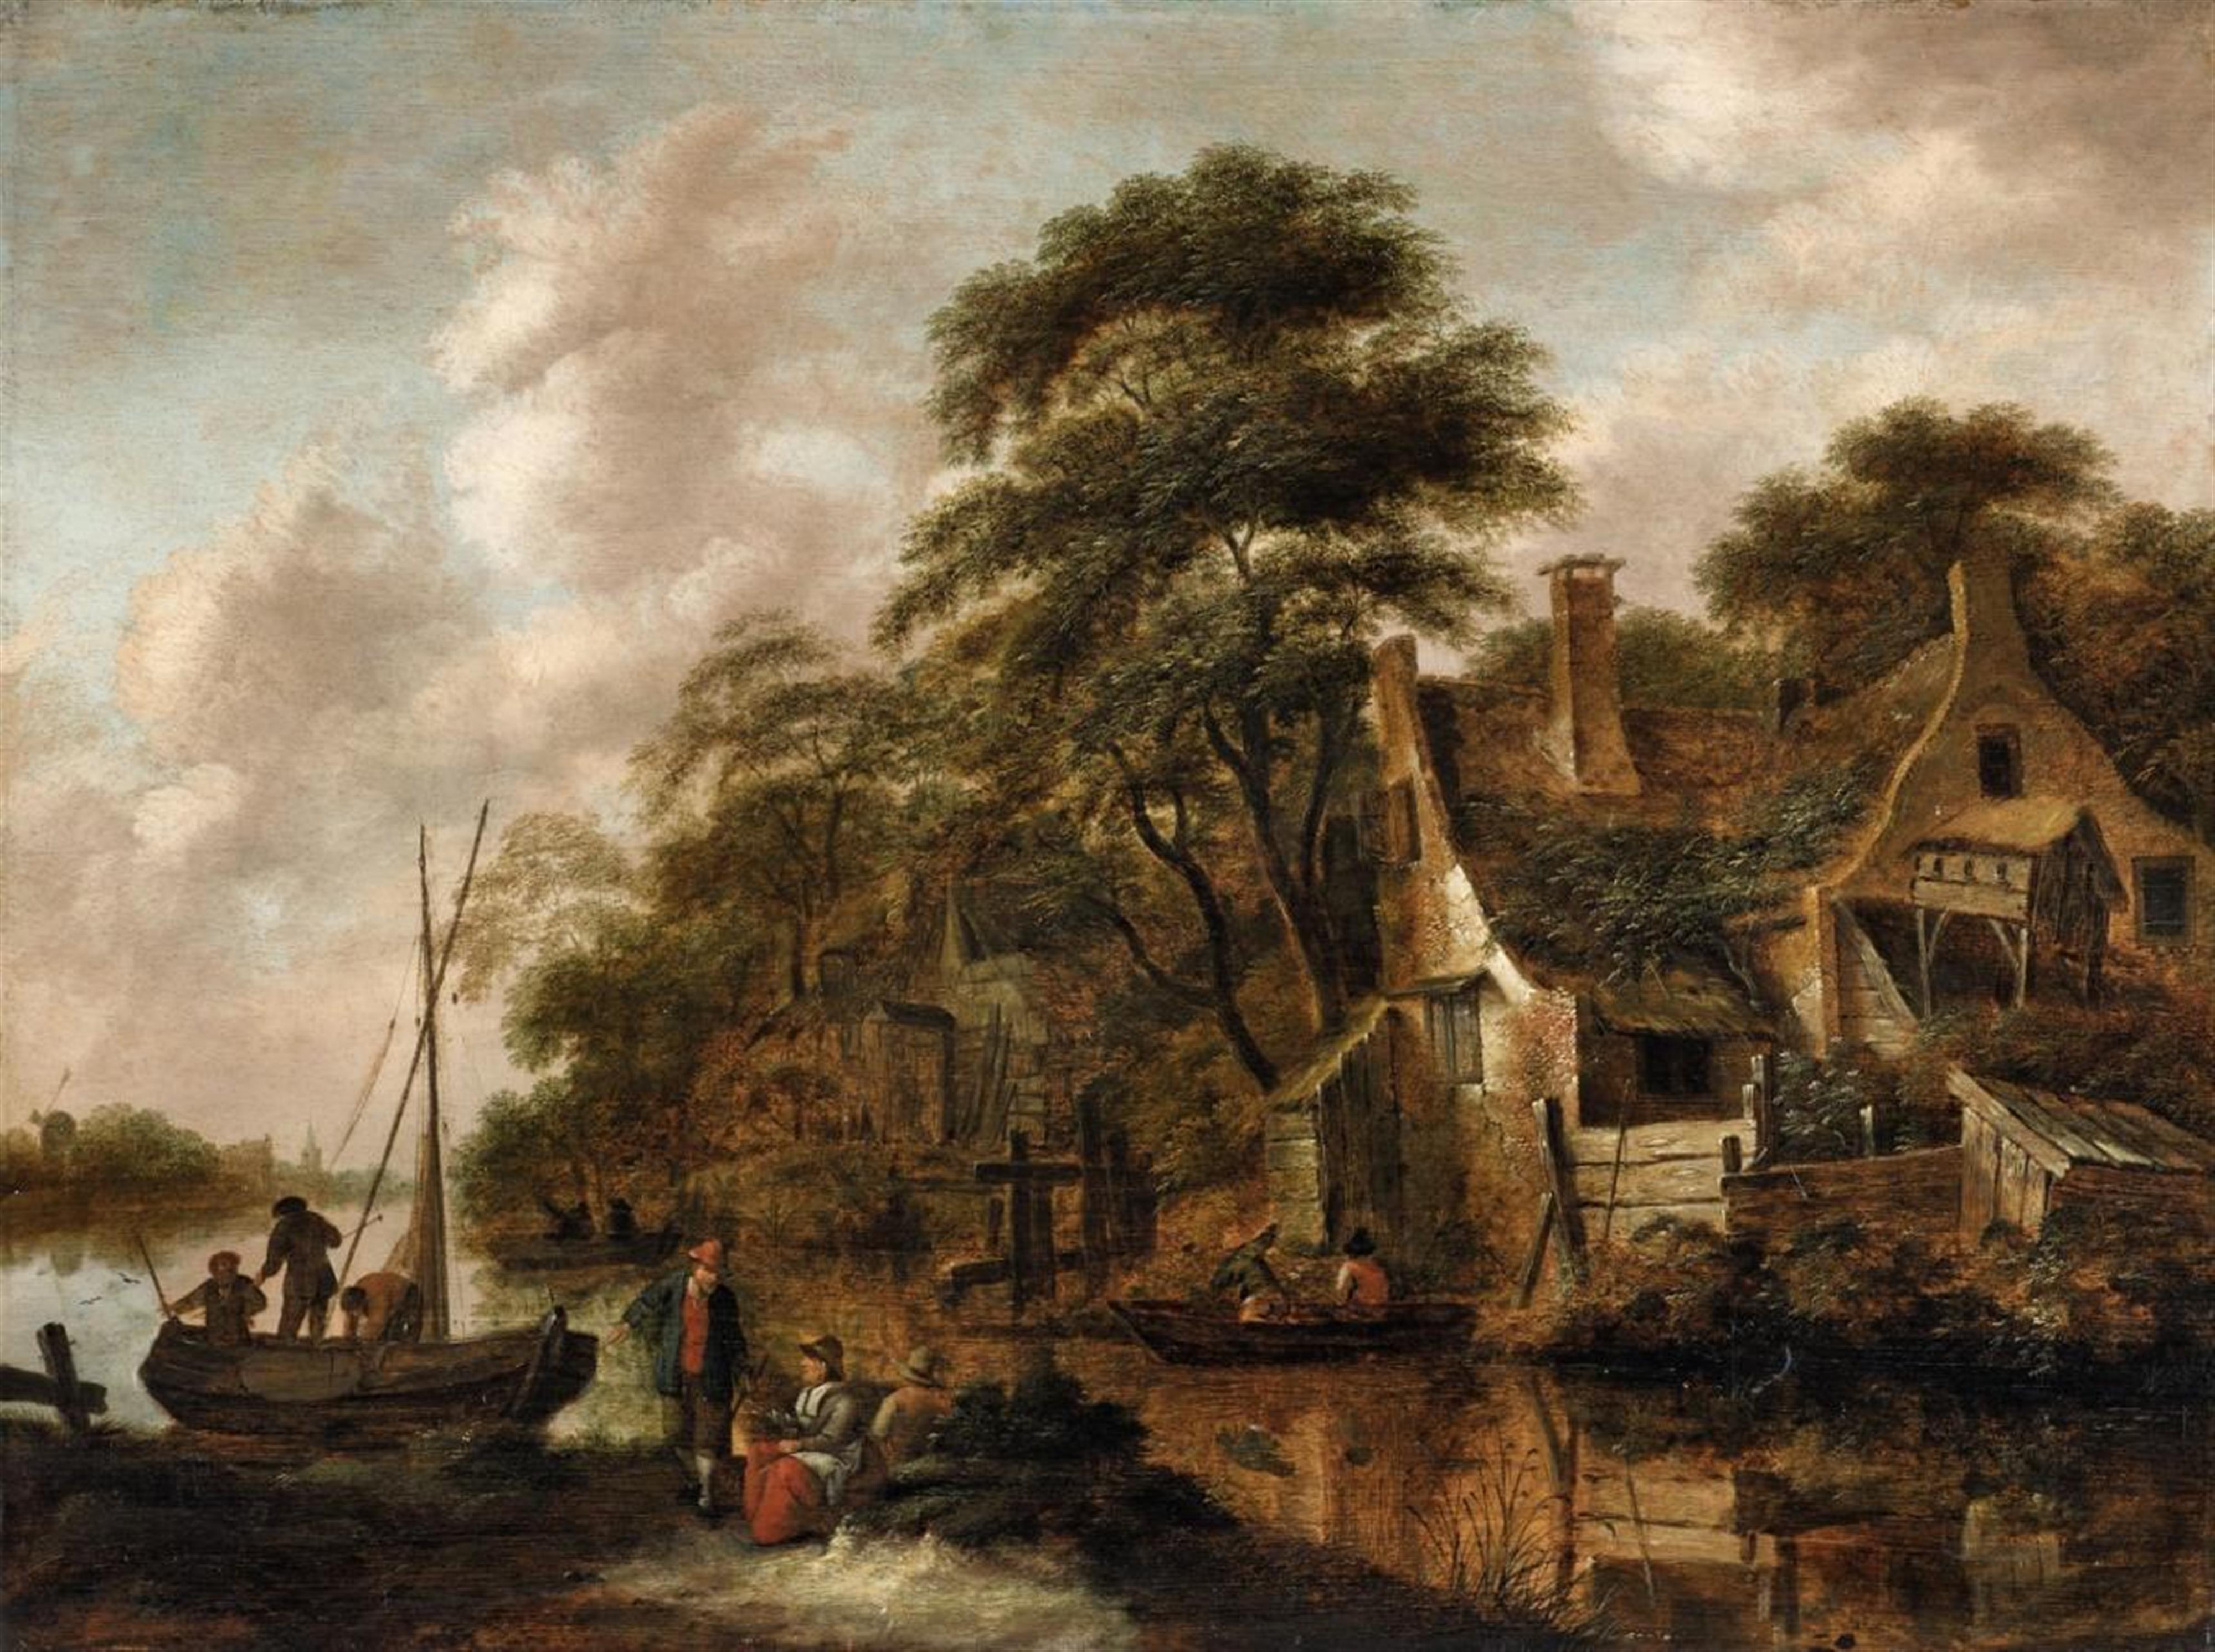 Cornelis Gerritsz. Decker, attributed to - Large Farmstead on the Bank of a River - image-1